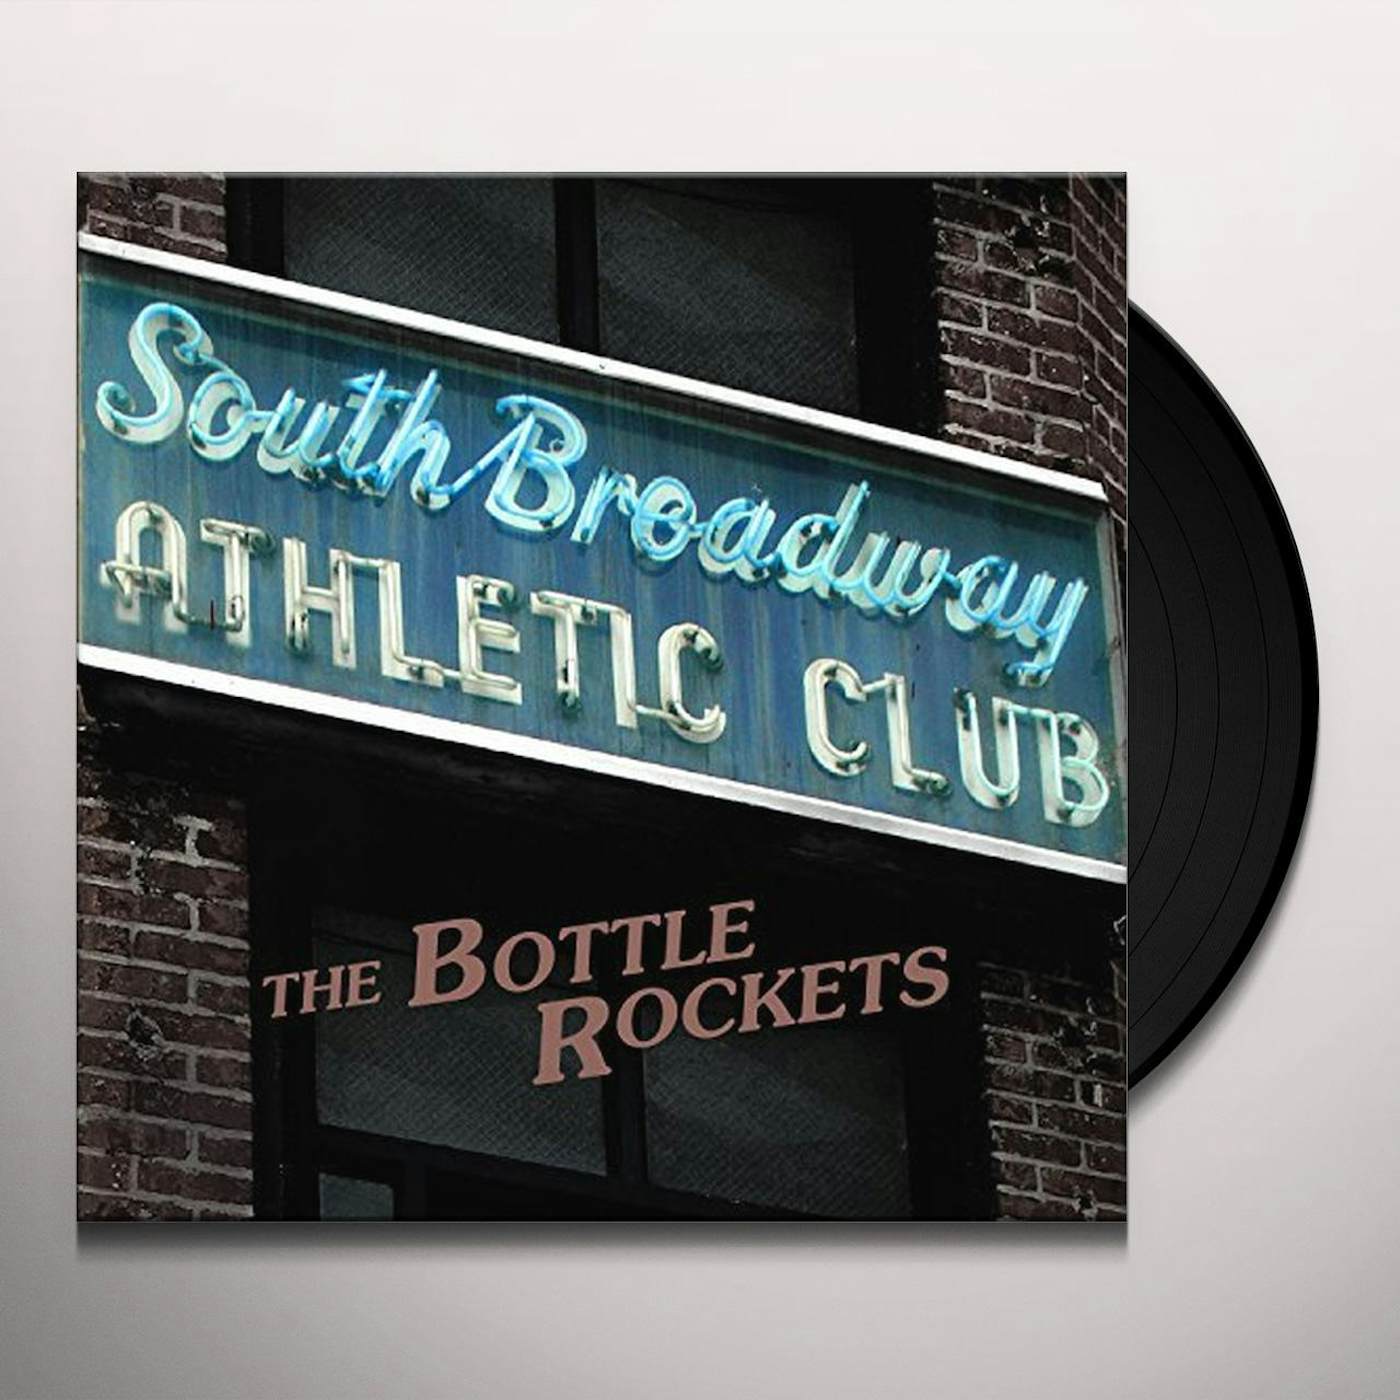 The Bottle Rockets South Broadway Athletic Club Vinyl Record